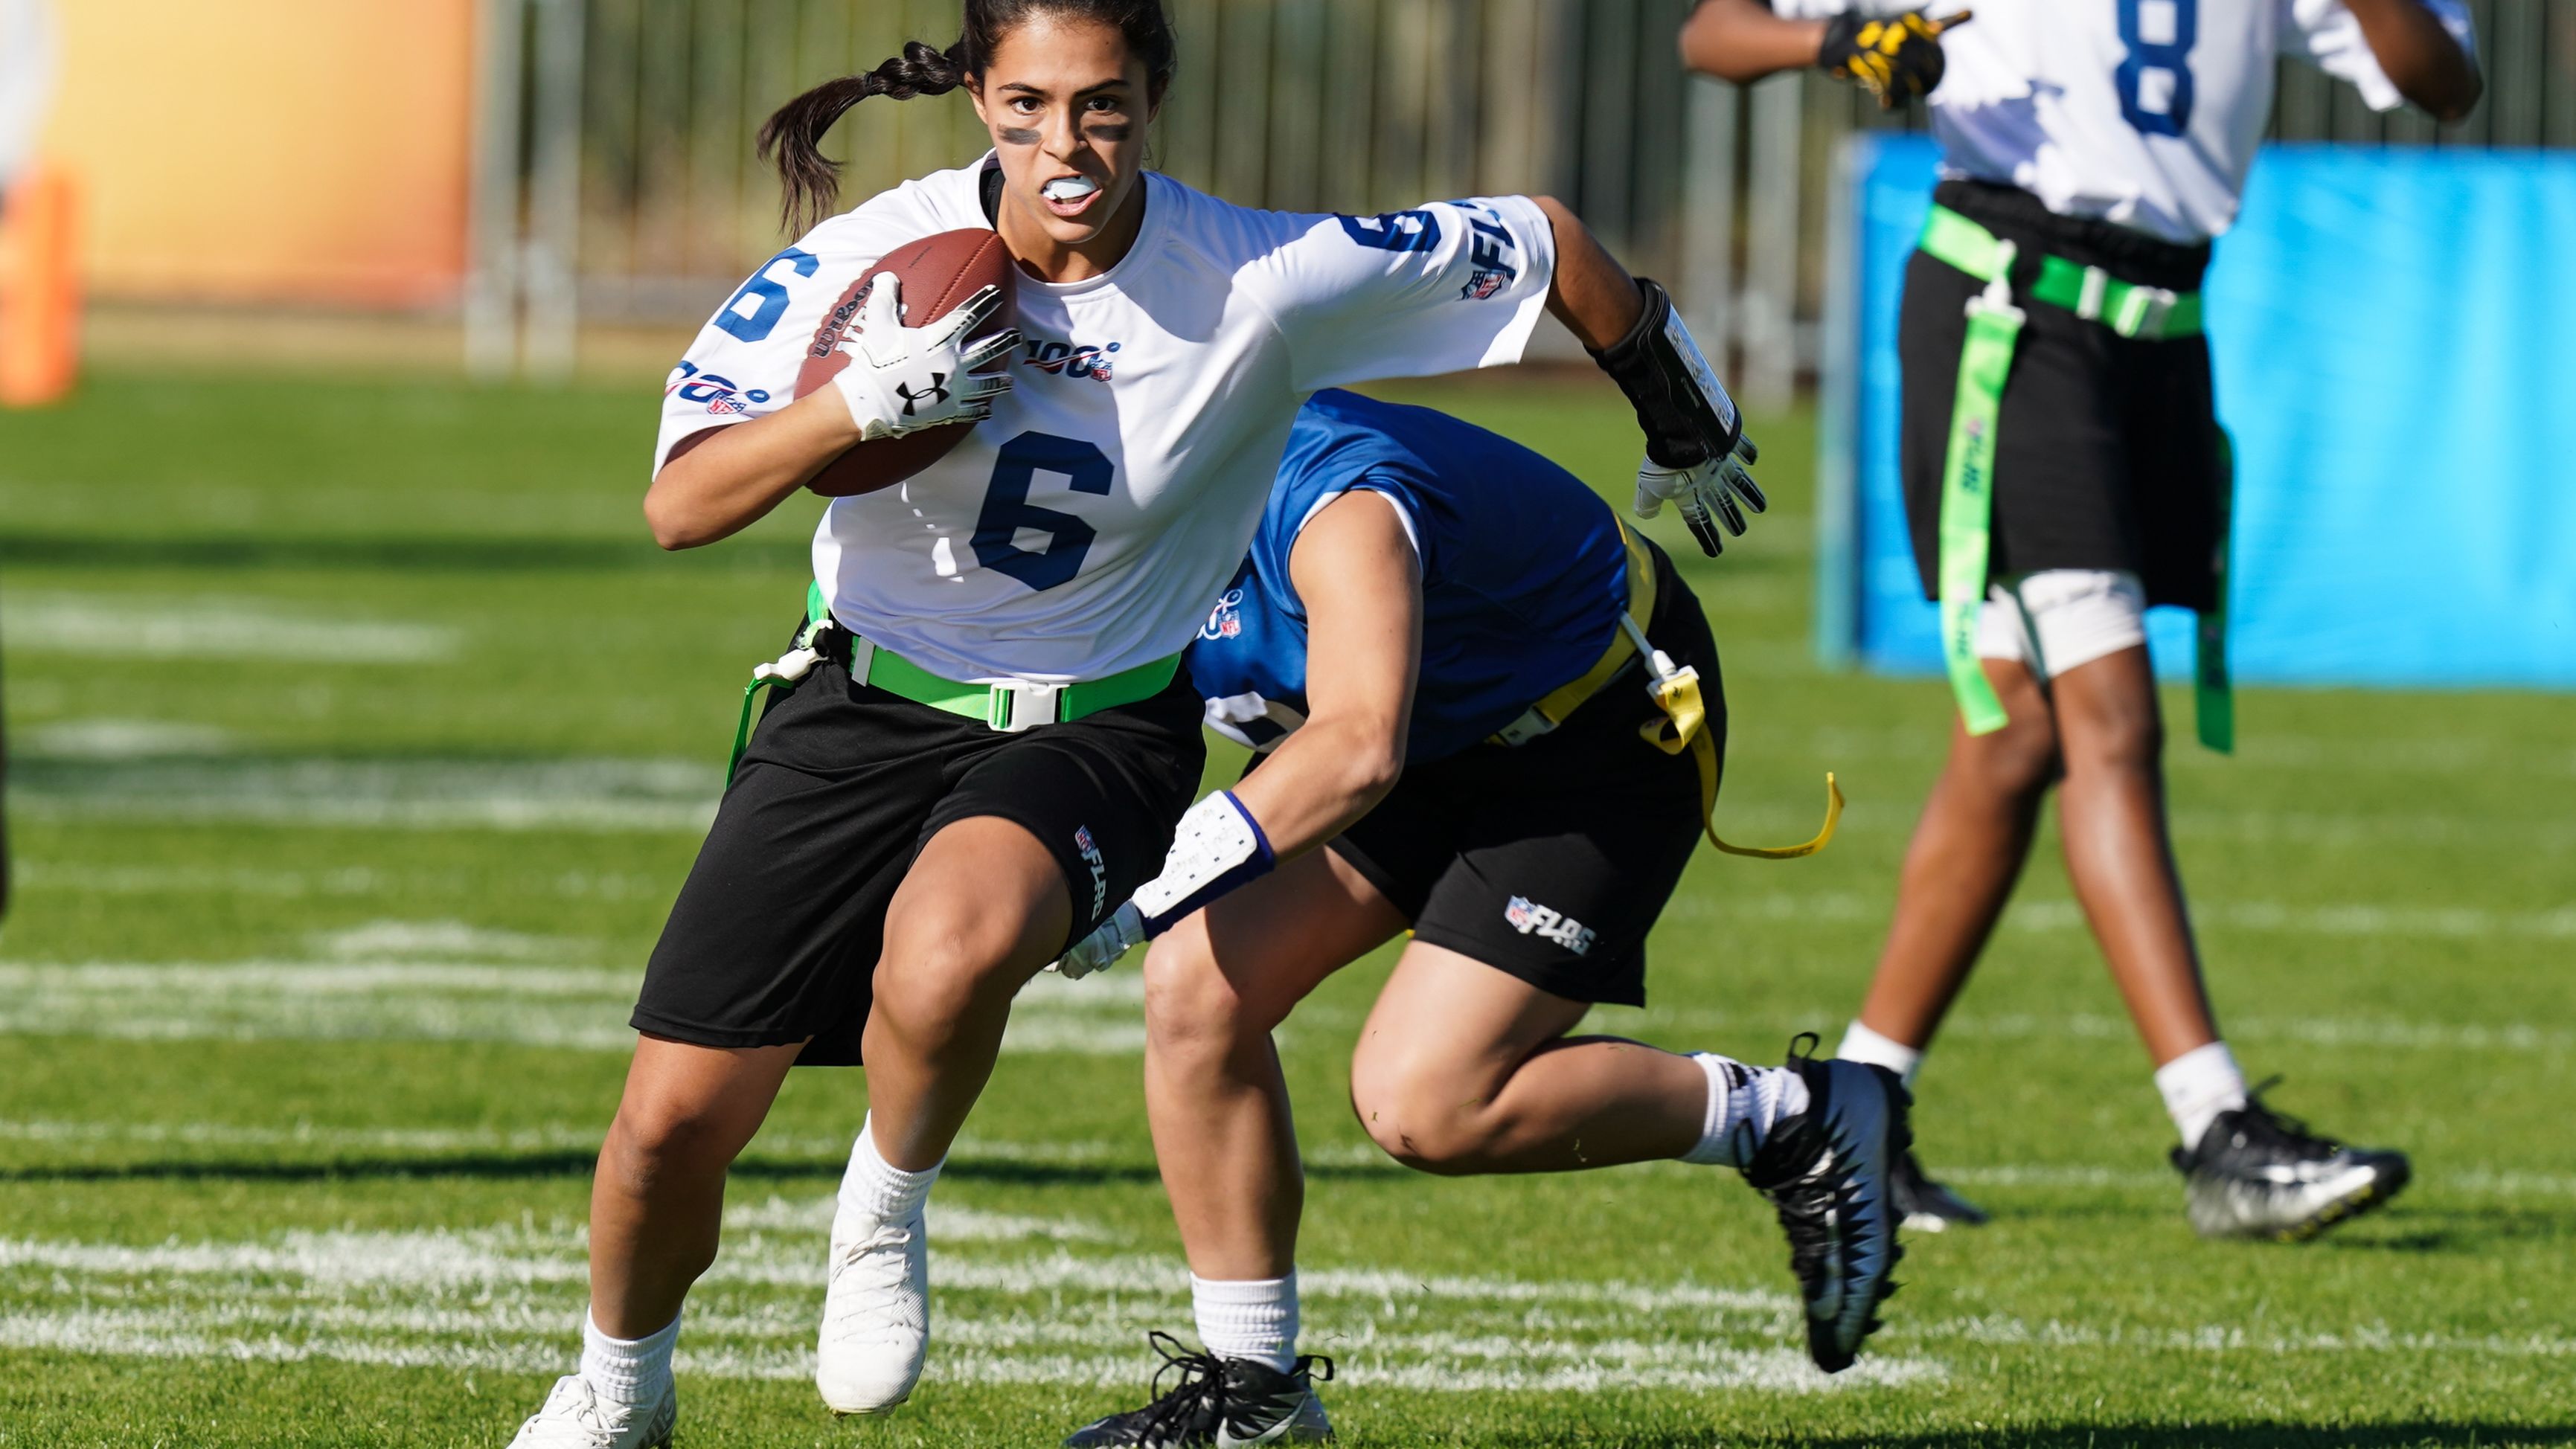 Teams from around the U.S. participate in the NFL Flag Football Championships.